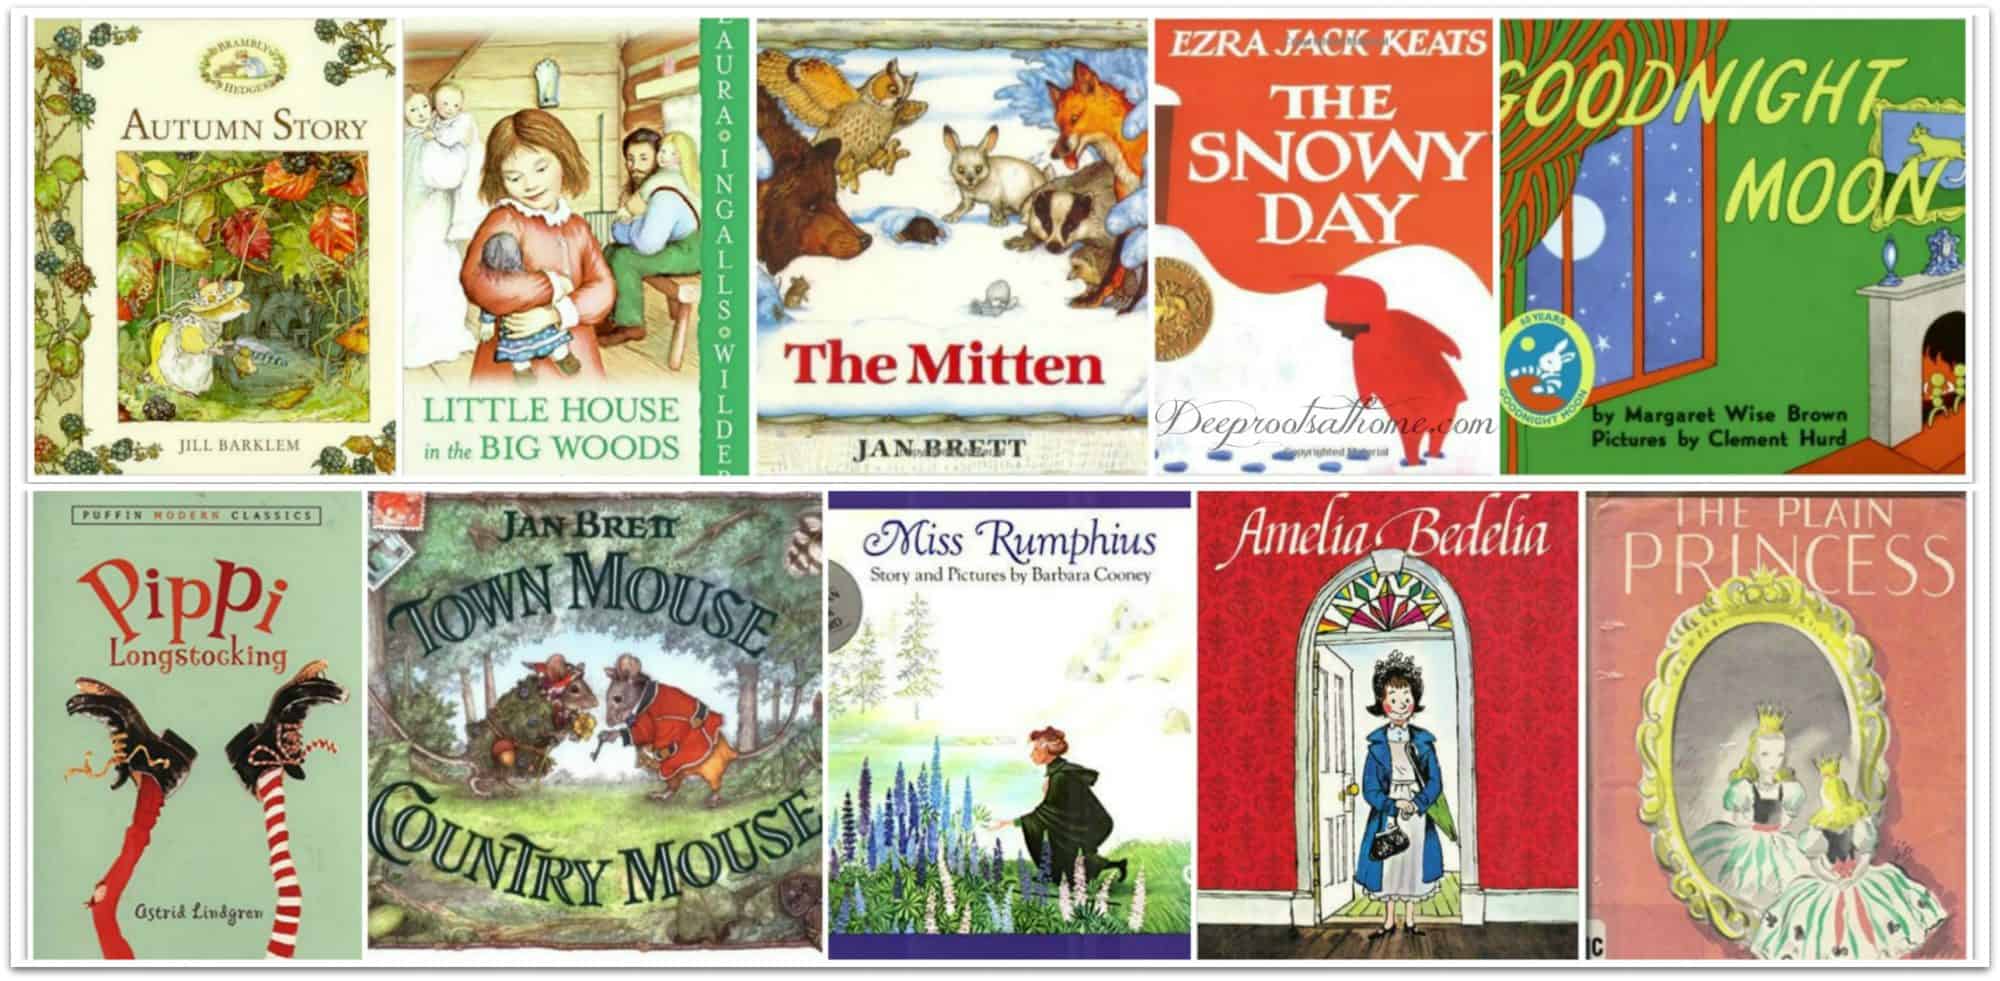 75 Classic Books We Shouldn't Neglect In A Child's Reading Repertoire. collage of books